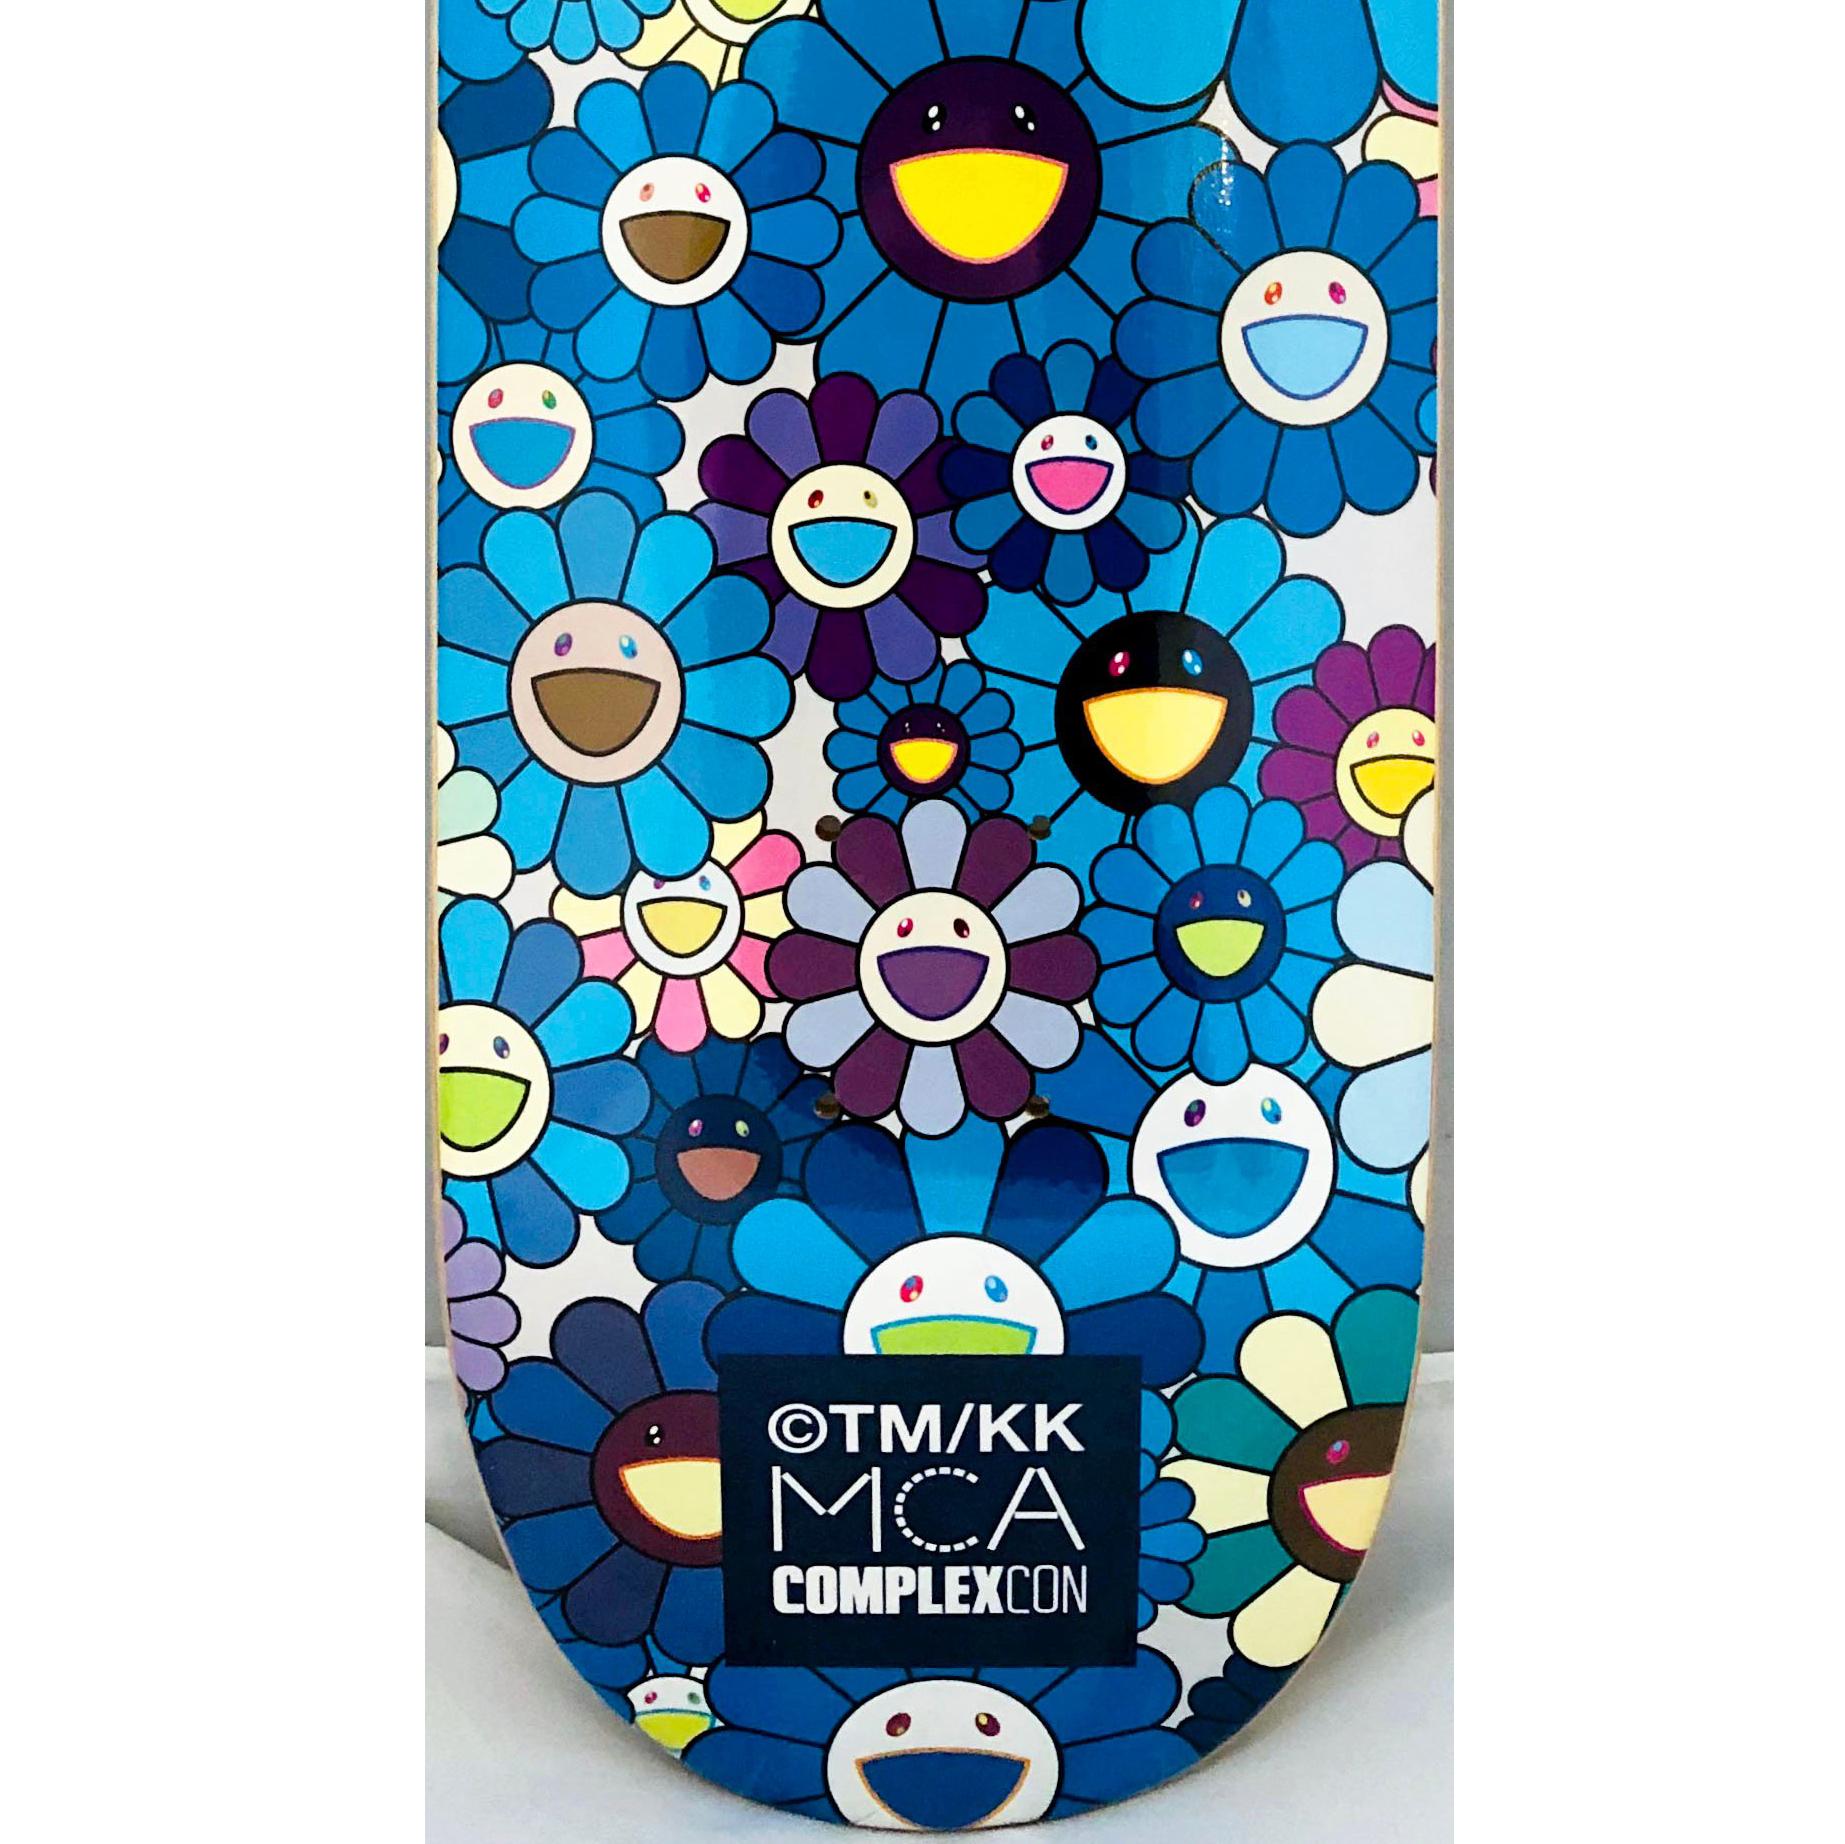 Takashi Murakami Flowers Skate Deck 
A vibrant piece of Takashi Murakami wall art produced as a limited series in conjunction with the 2017 Murakami exhibit: The Octopus Eats Its Own Leg, MCA Chicago. This deck is new in its original packaging. A